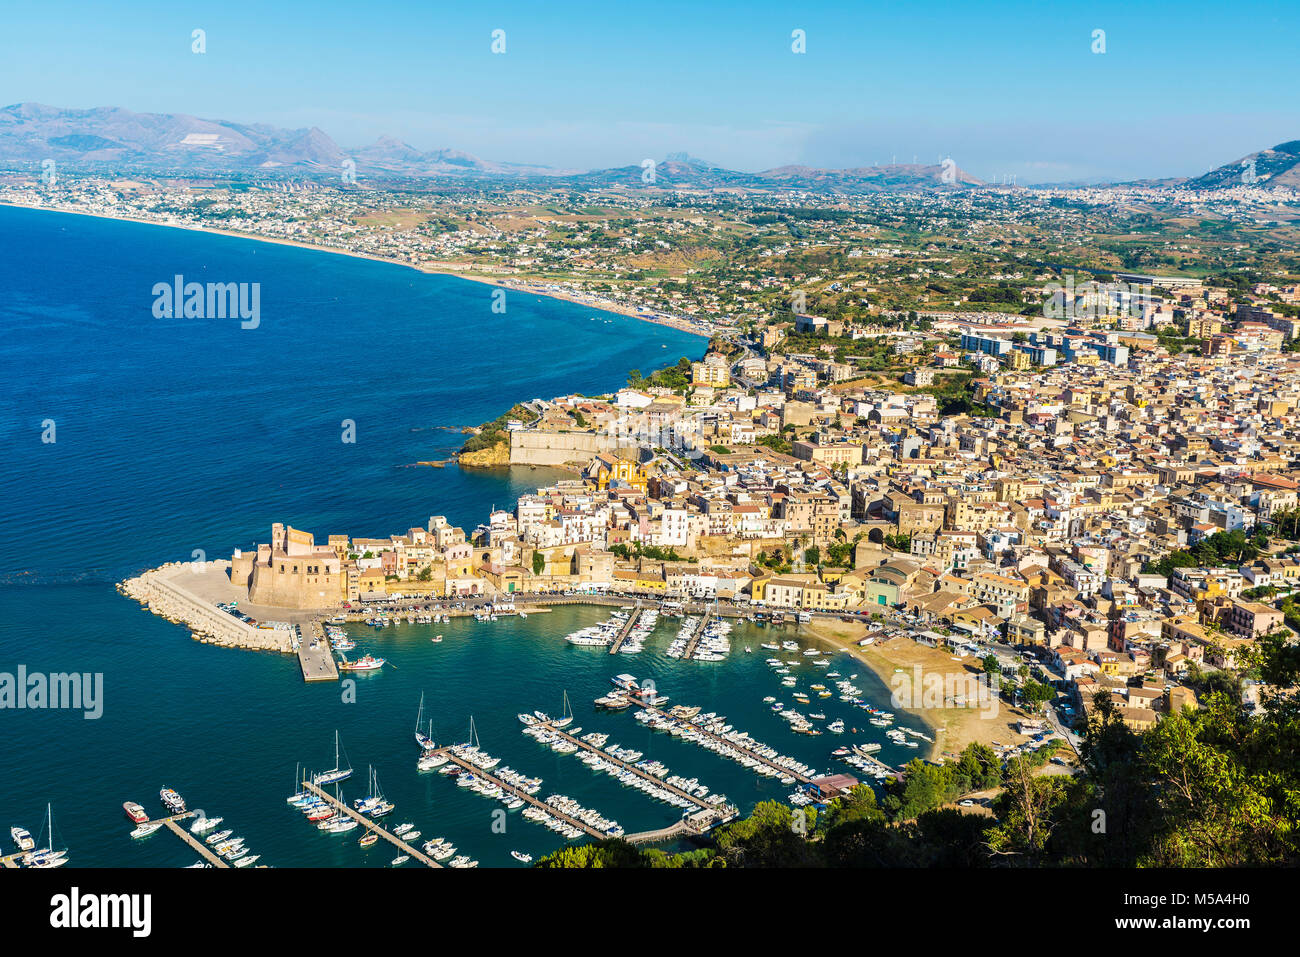 Overview of Castellammare del Golfo with its marina and its medieval ...